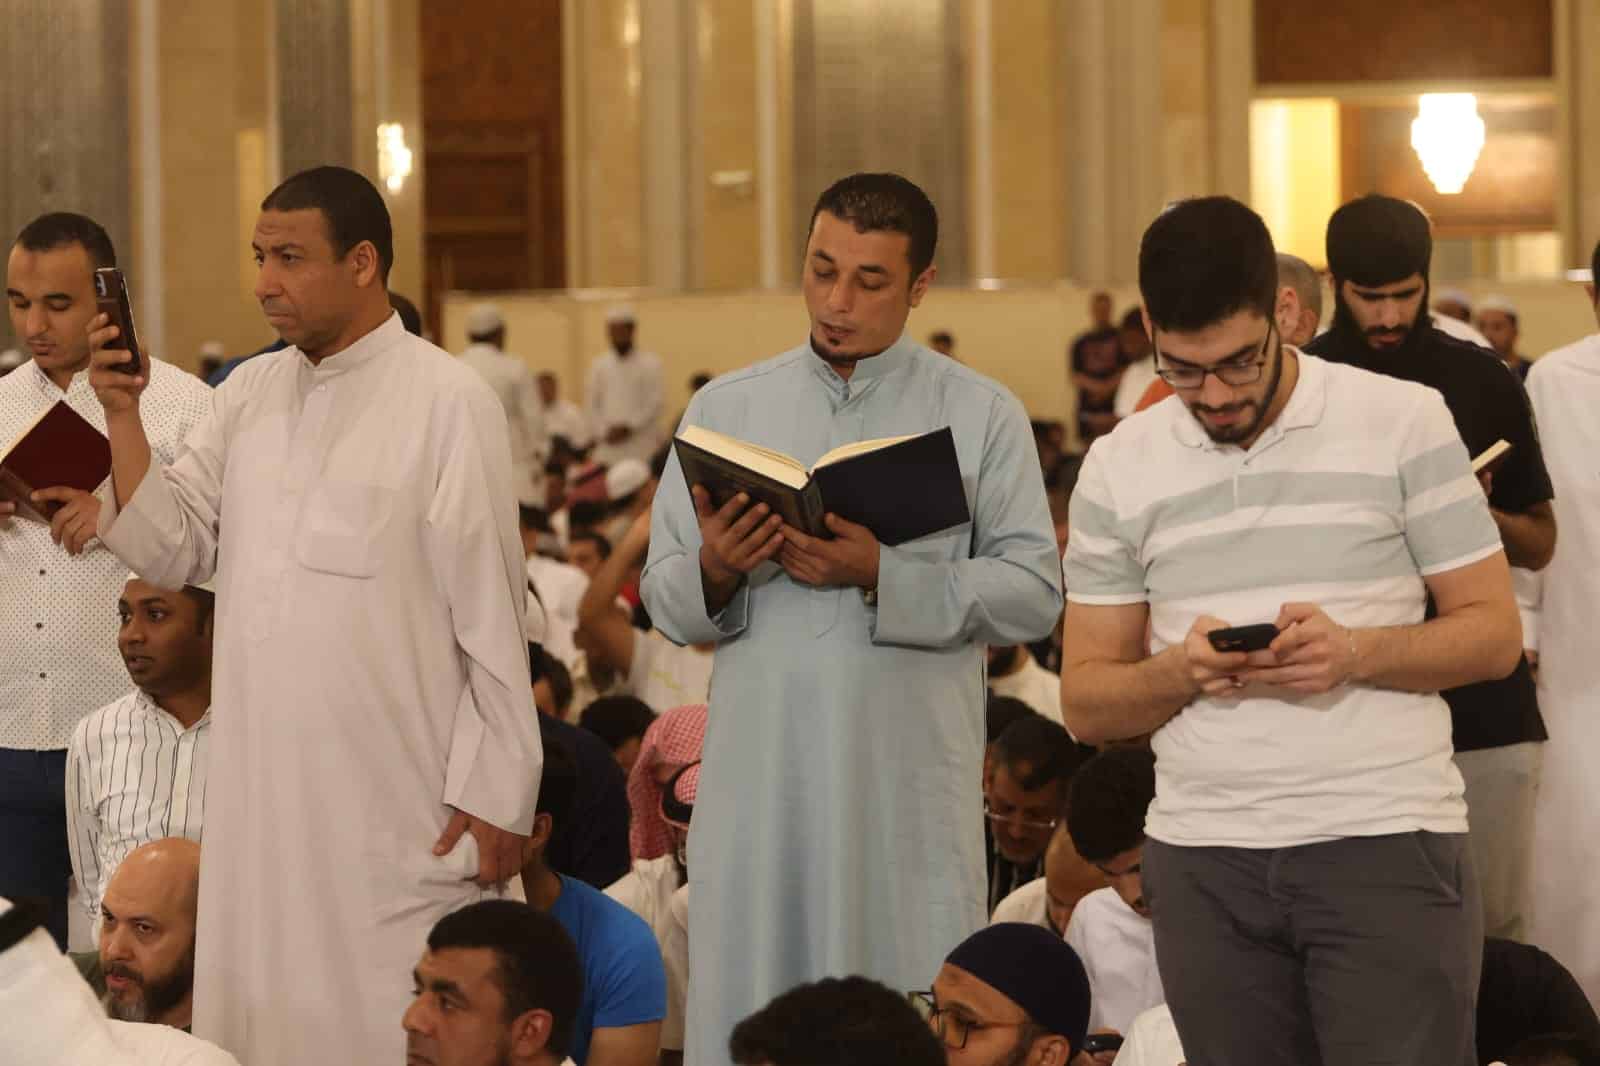 Worshippers spend night in prayer at Grand Mosque